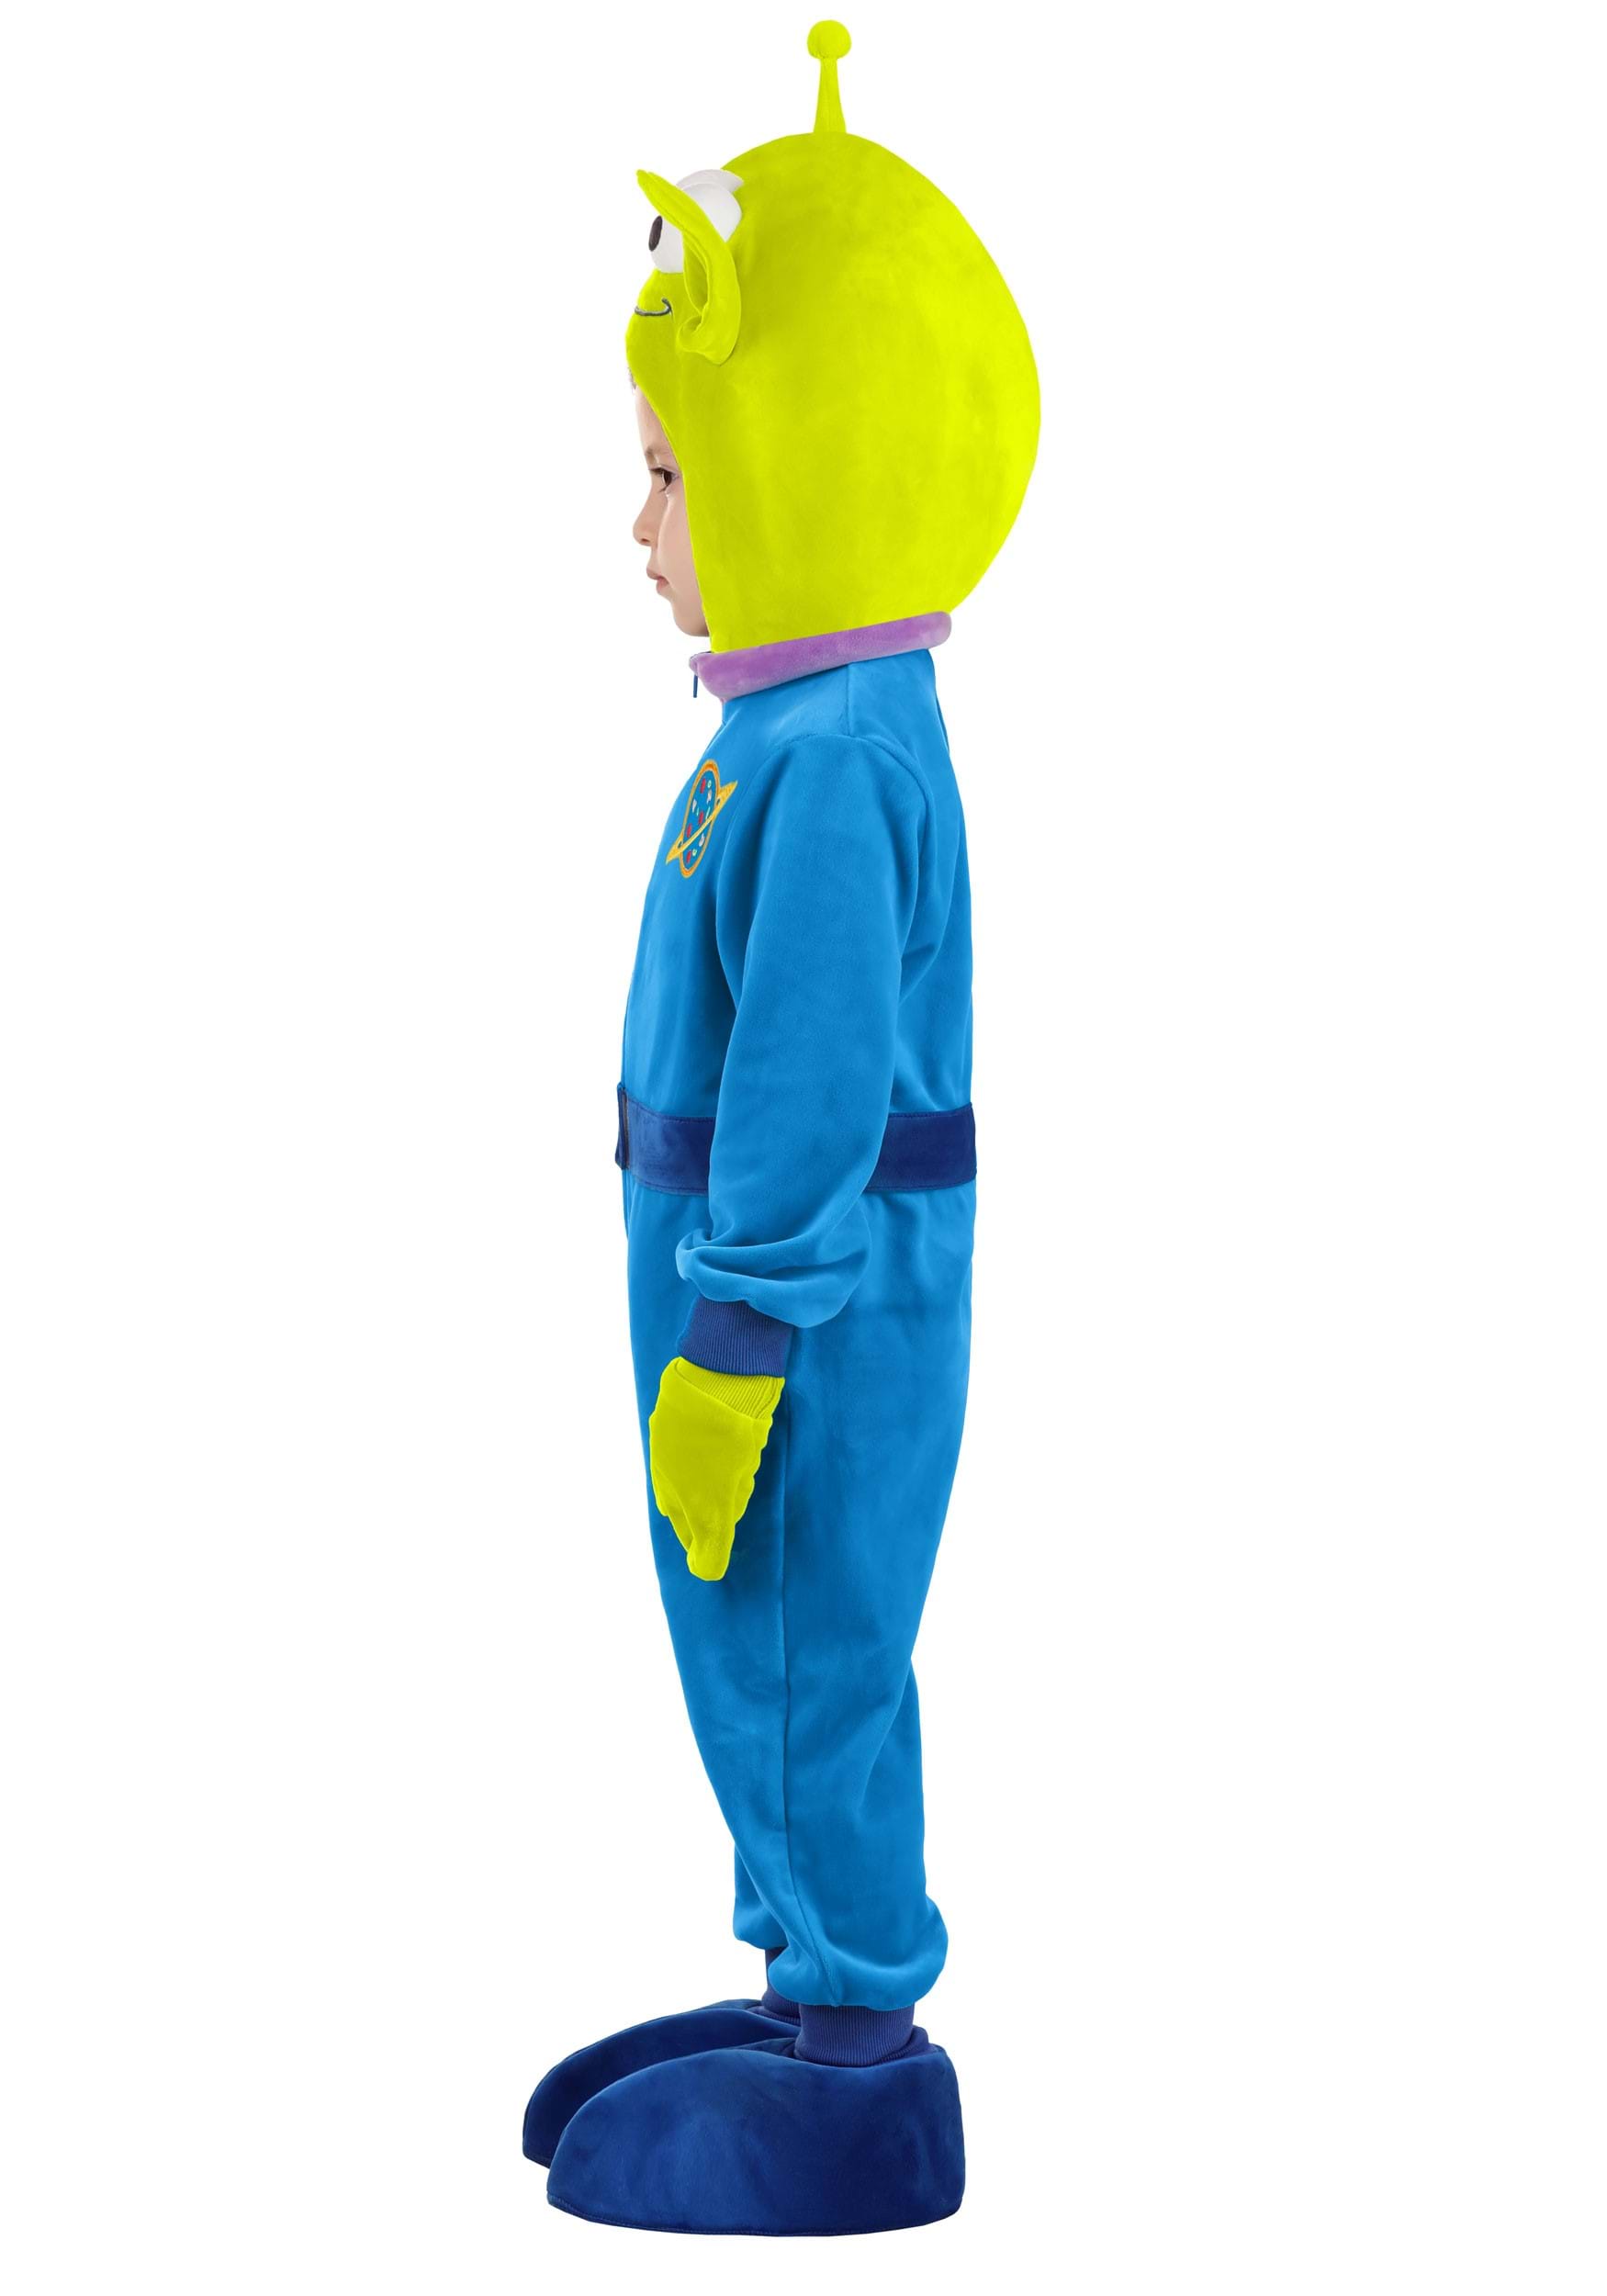 Disney and Pixar Toy Story Alien Costume for Kids